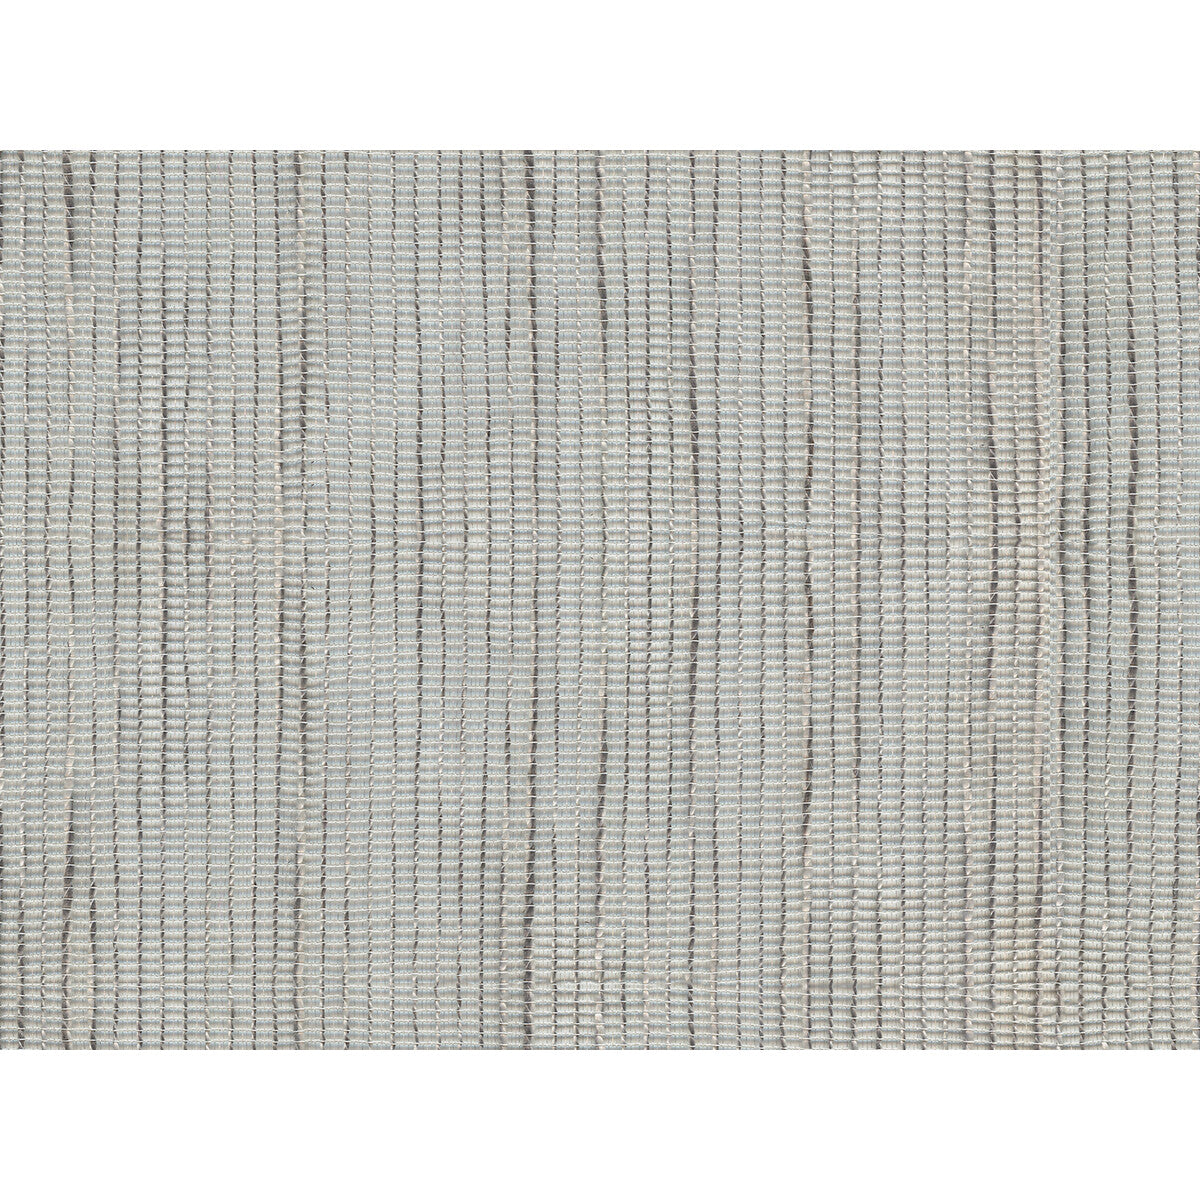 Kravet Contract fabric in 4543-11 color - pattern 4543.11.0 - by Kravet Contract